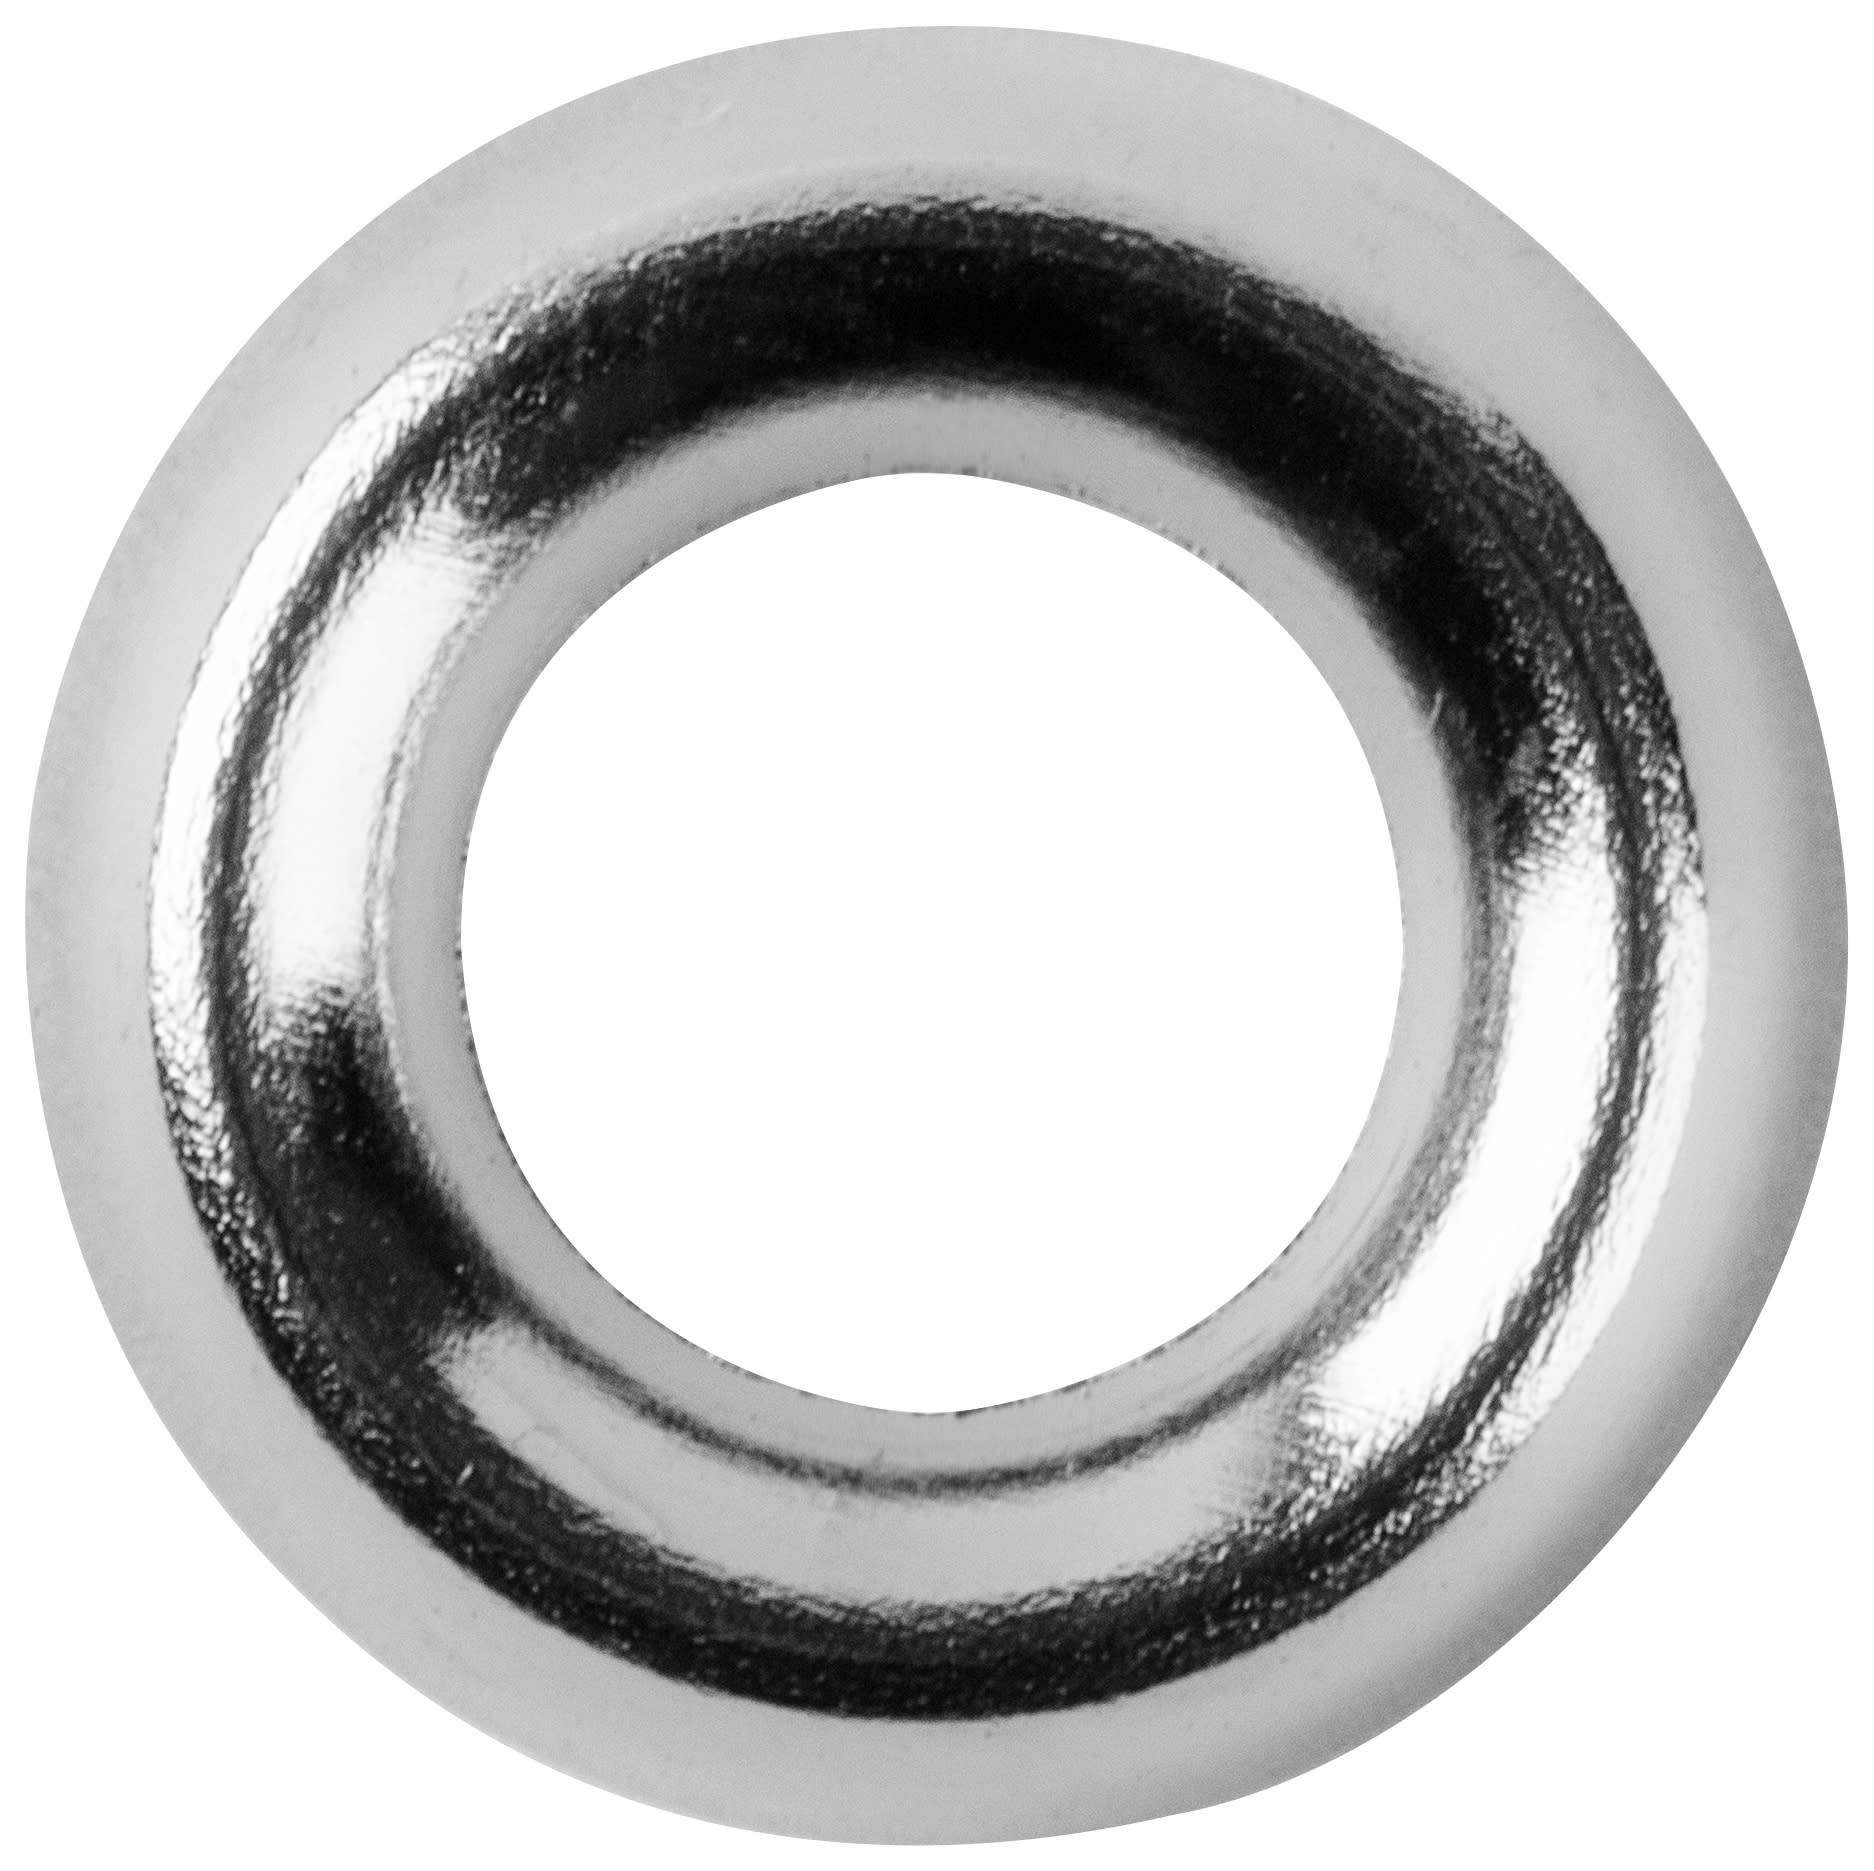 Wickes Nickel Plated Screw Cup Washers - 5mm